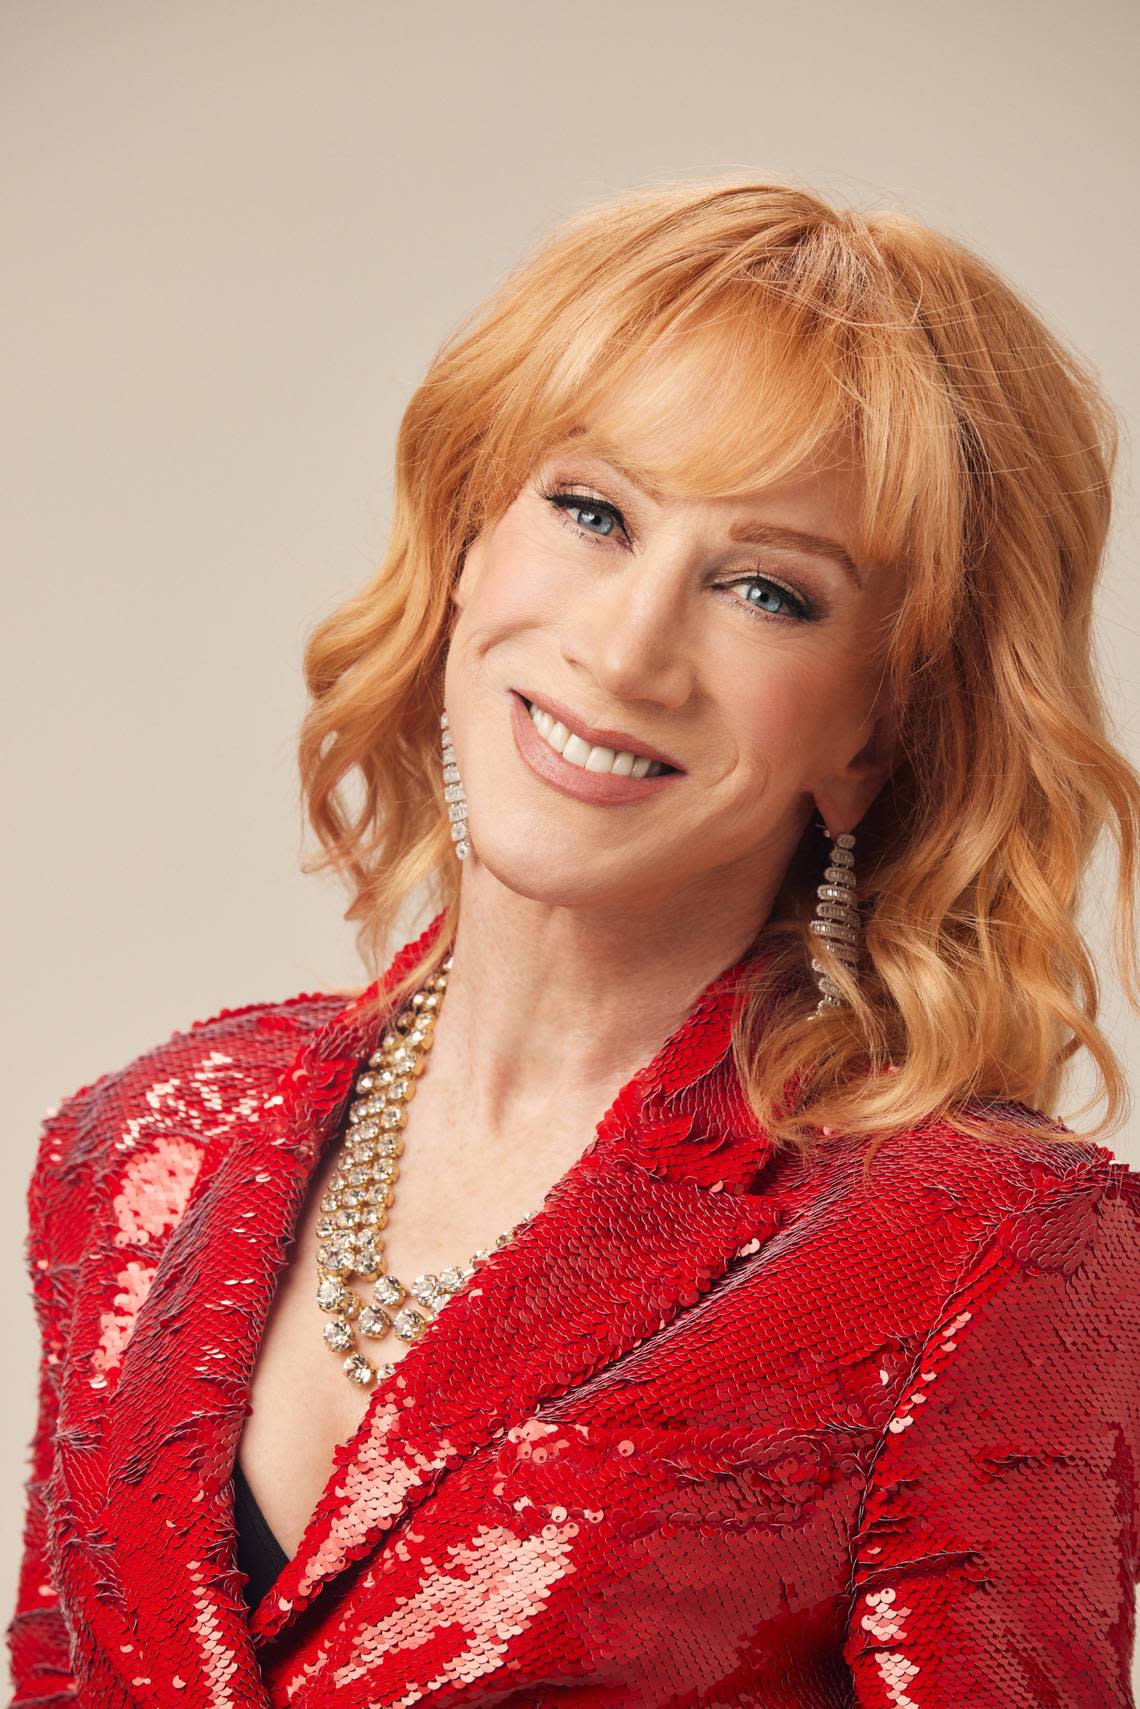 Actress, author, reality show star, comedian and pop culture commentator Kathy Griffin is back on the road with a new comedy tour. The shows feature a new voice from Griffin, who recovered from lung cancer. Provided